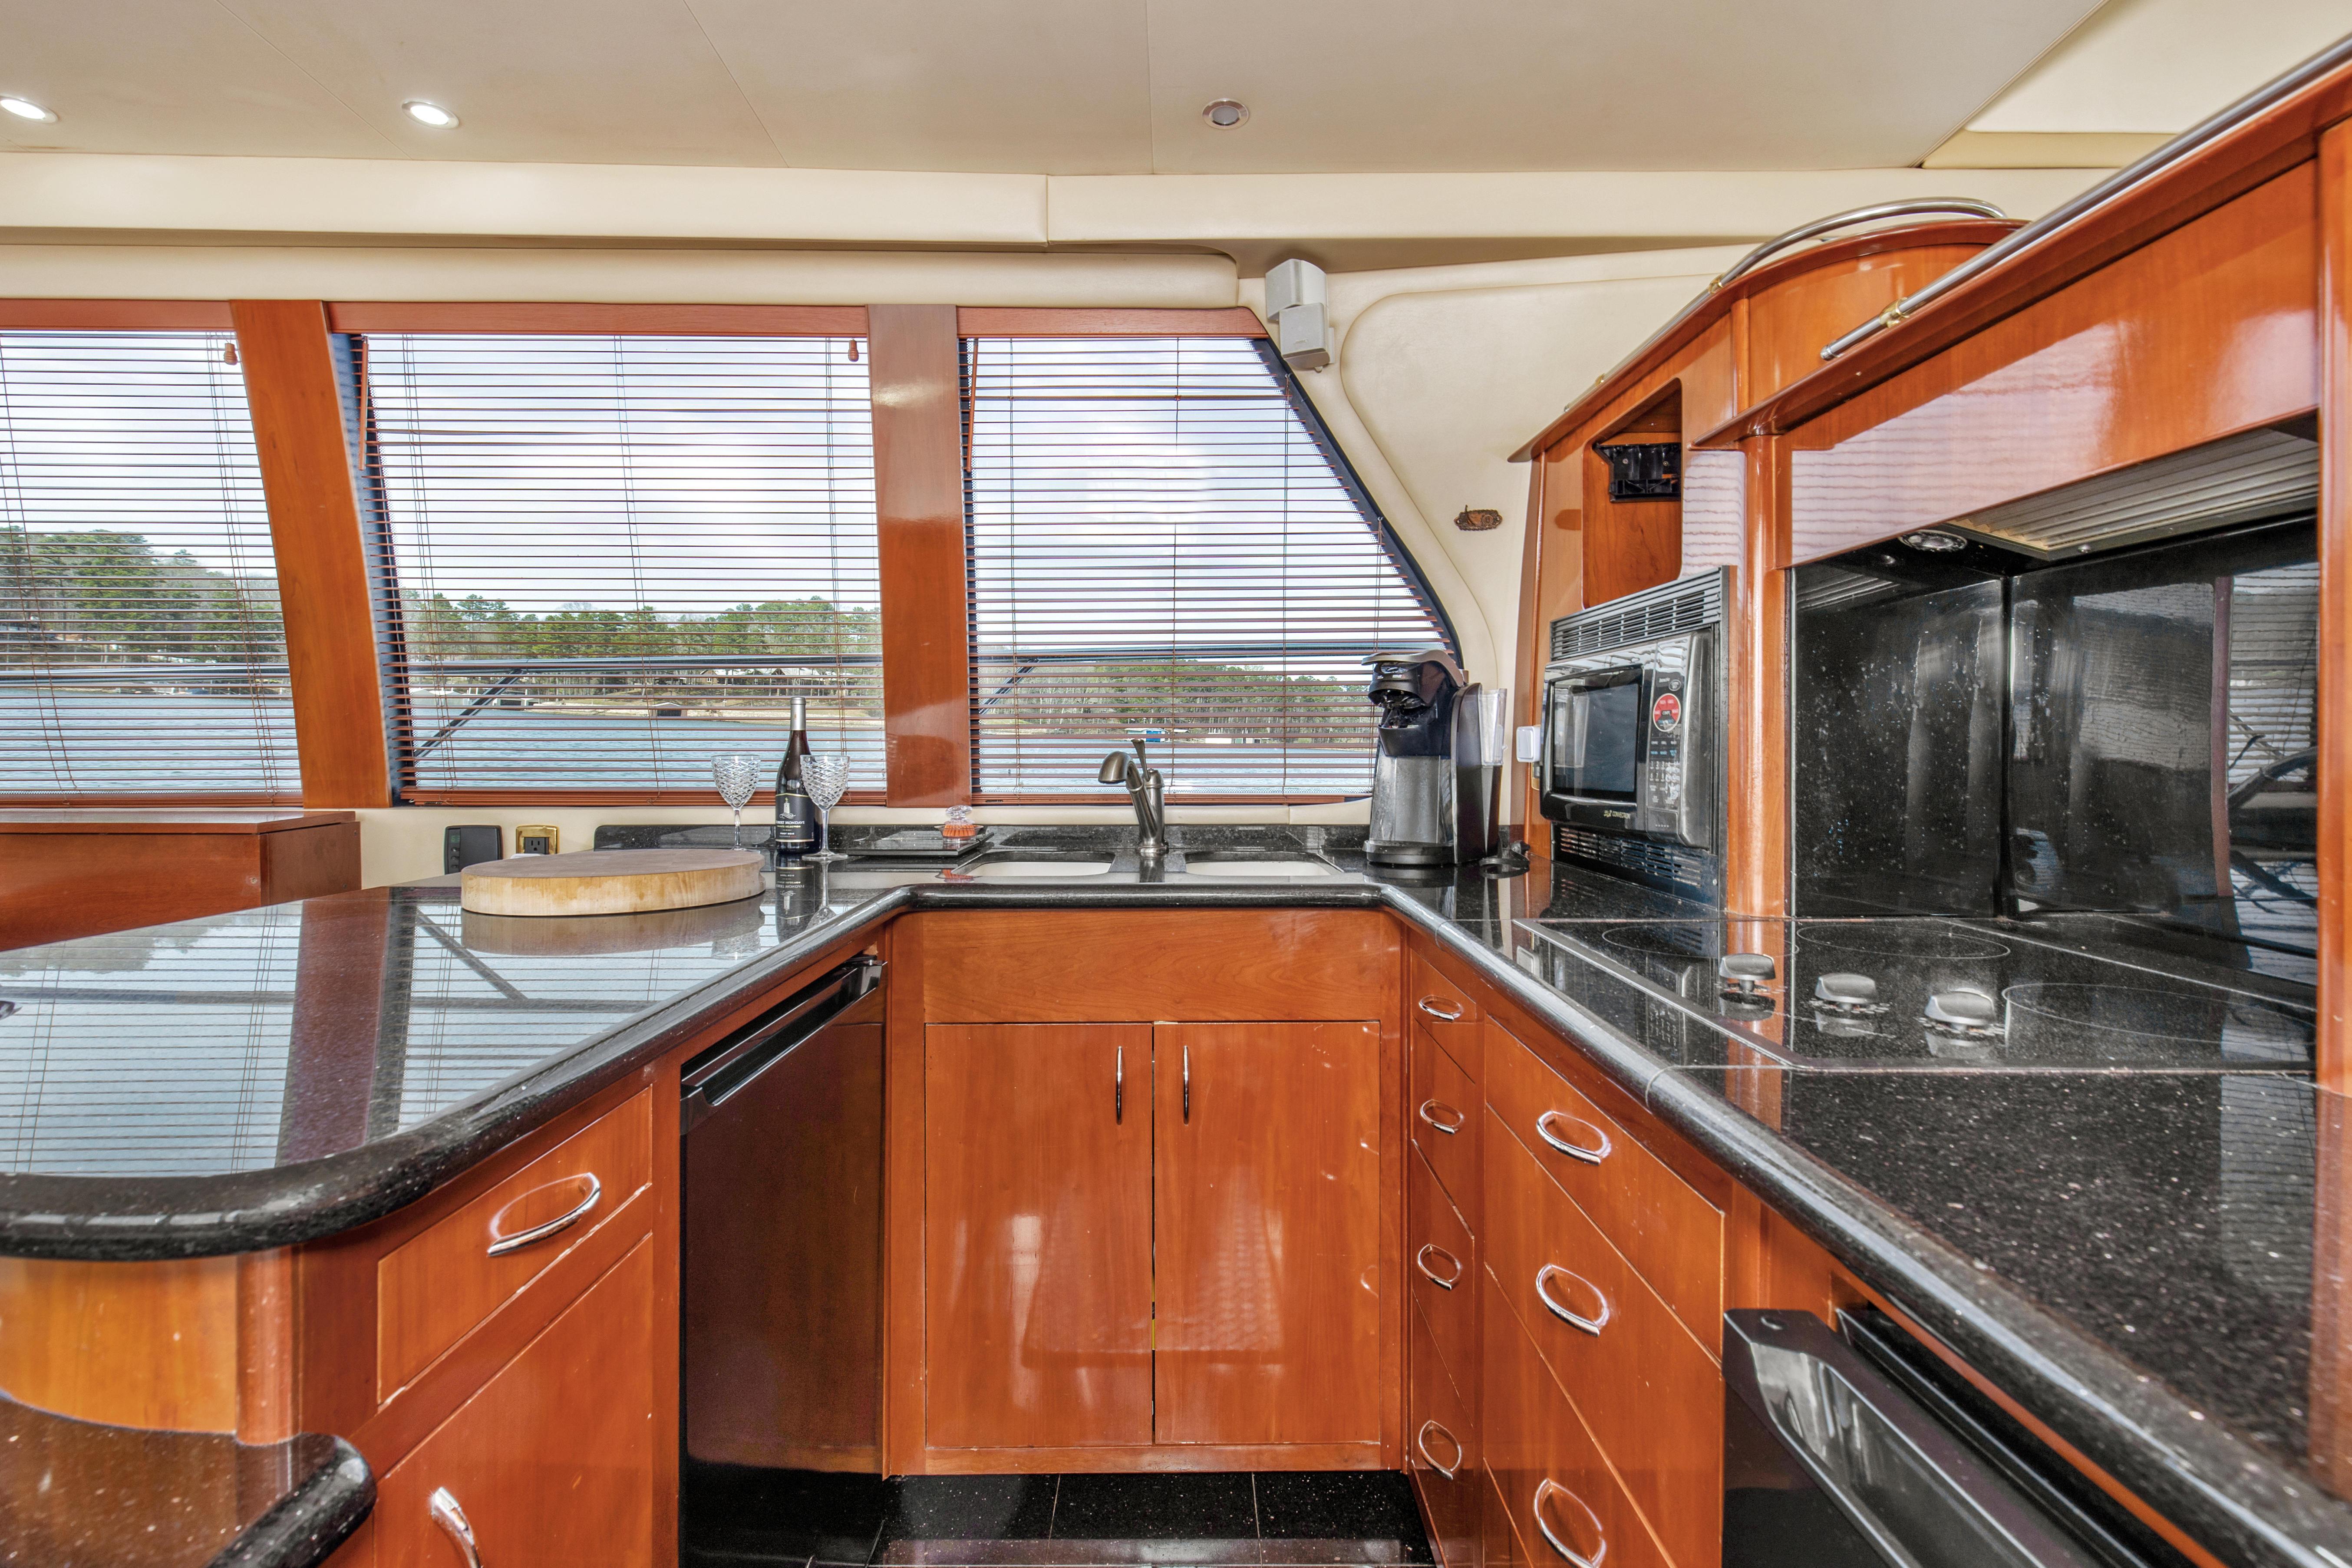 2003 57' Carver 570 Voyager Beautiful Galley